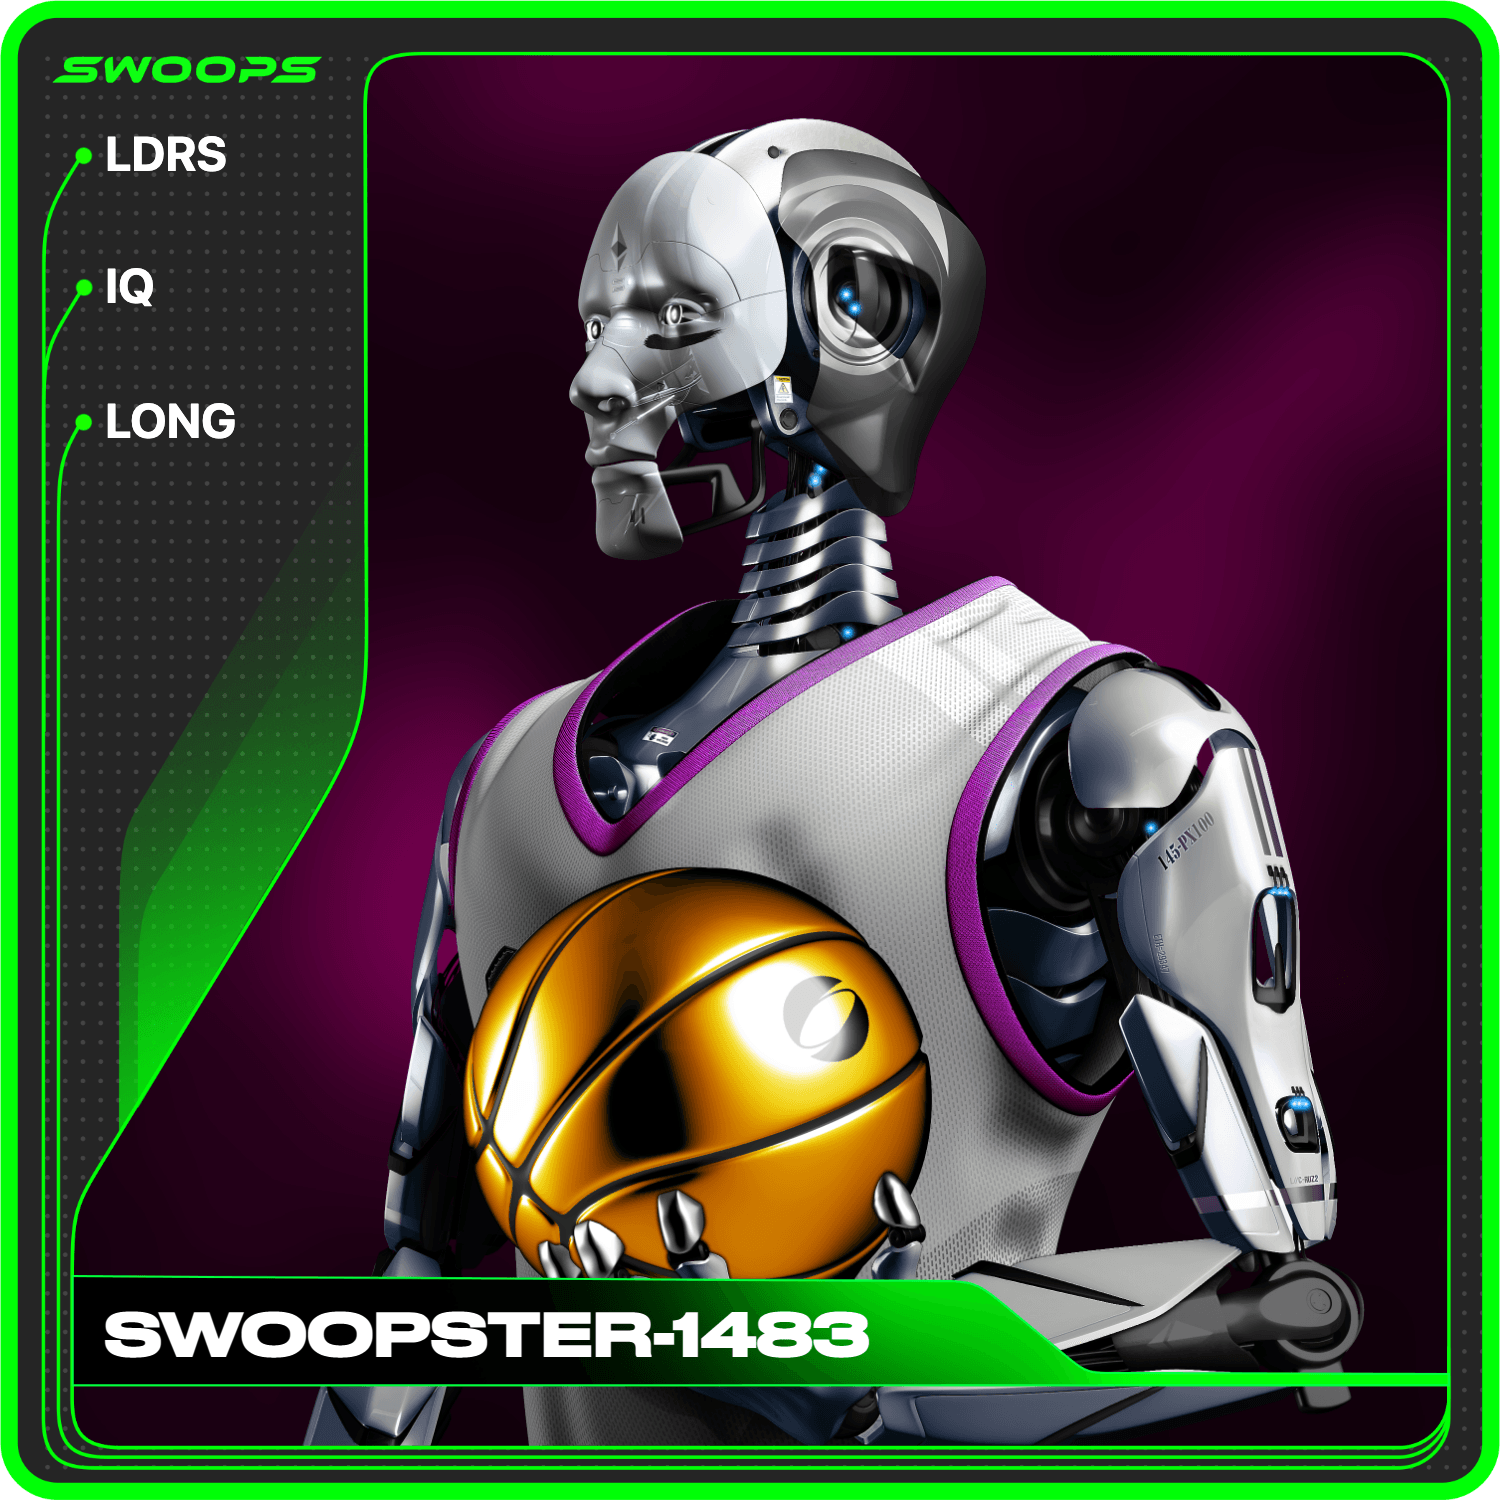 SWOOPSTER-1483